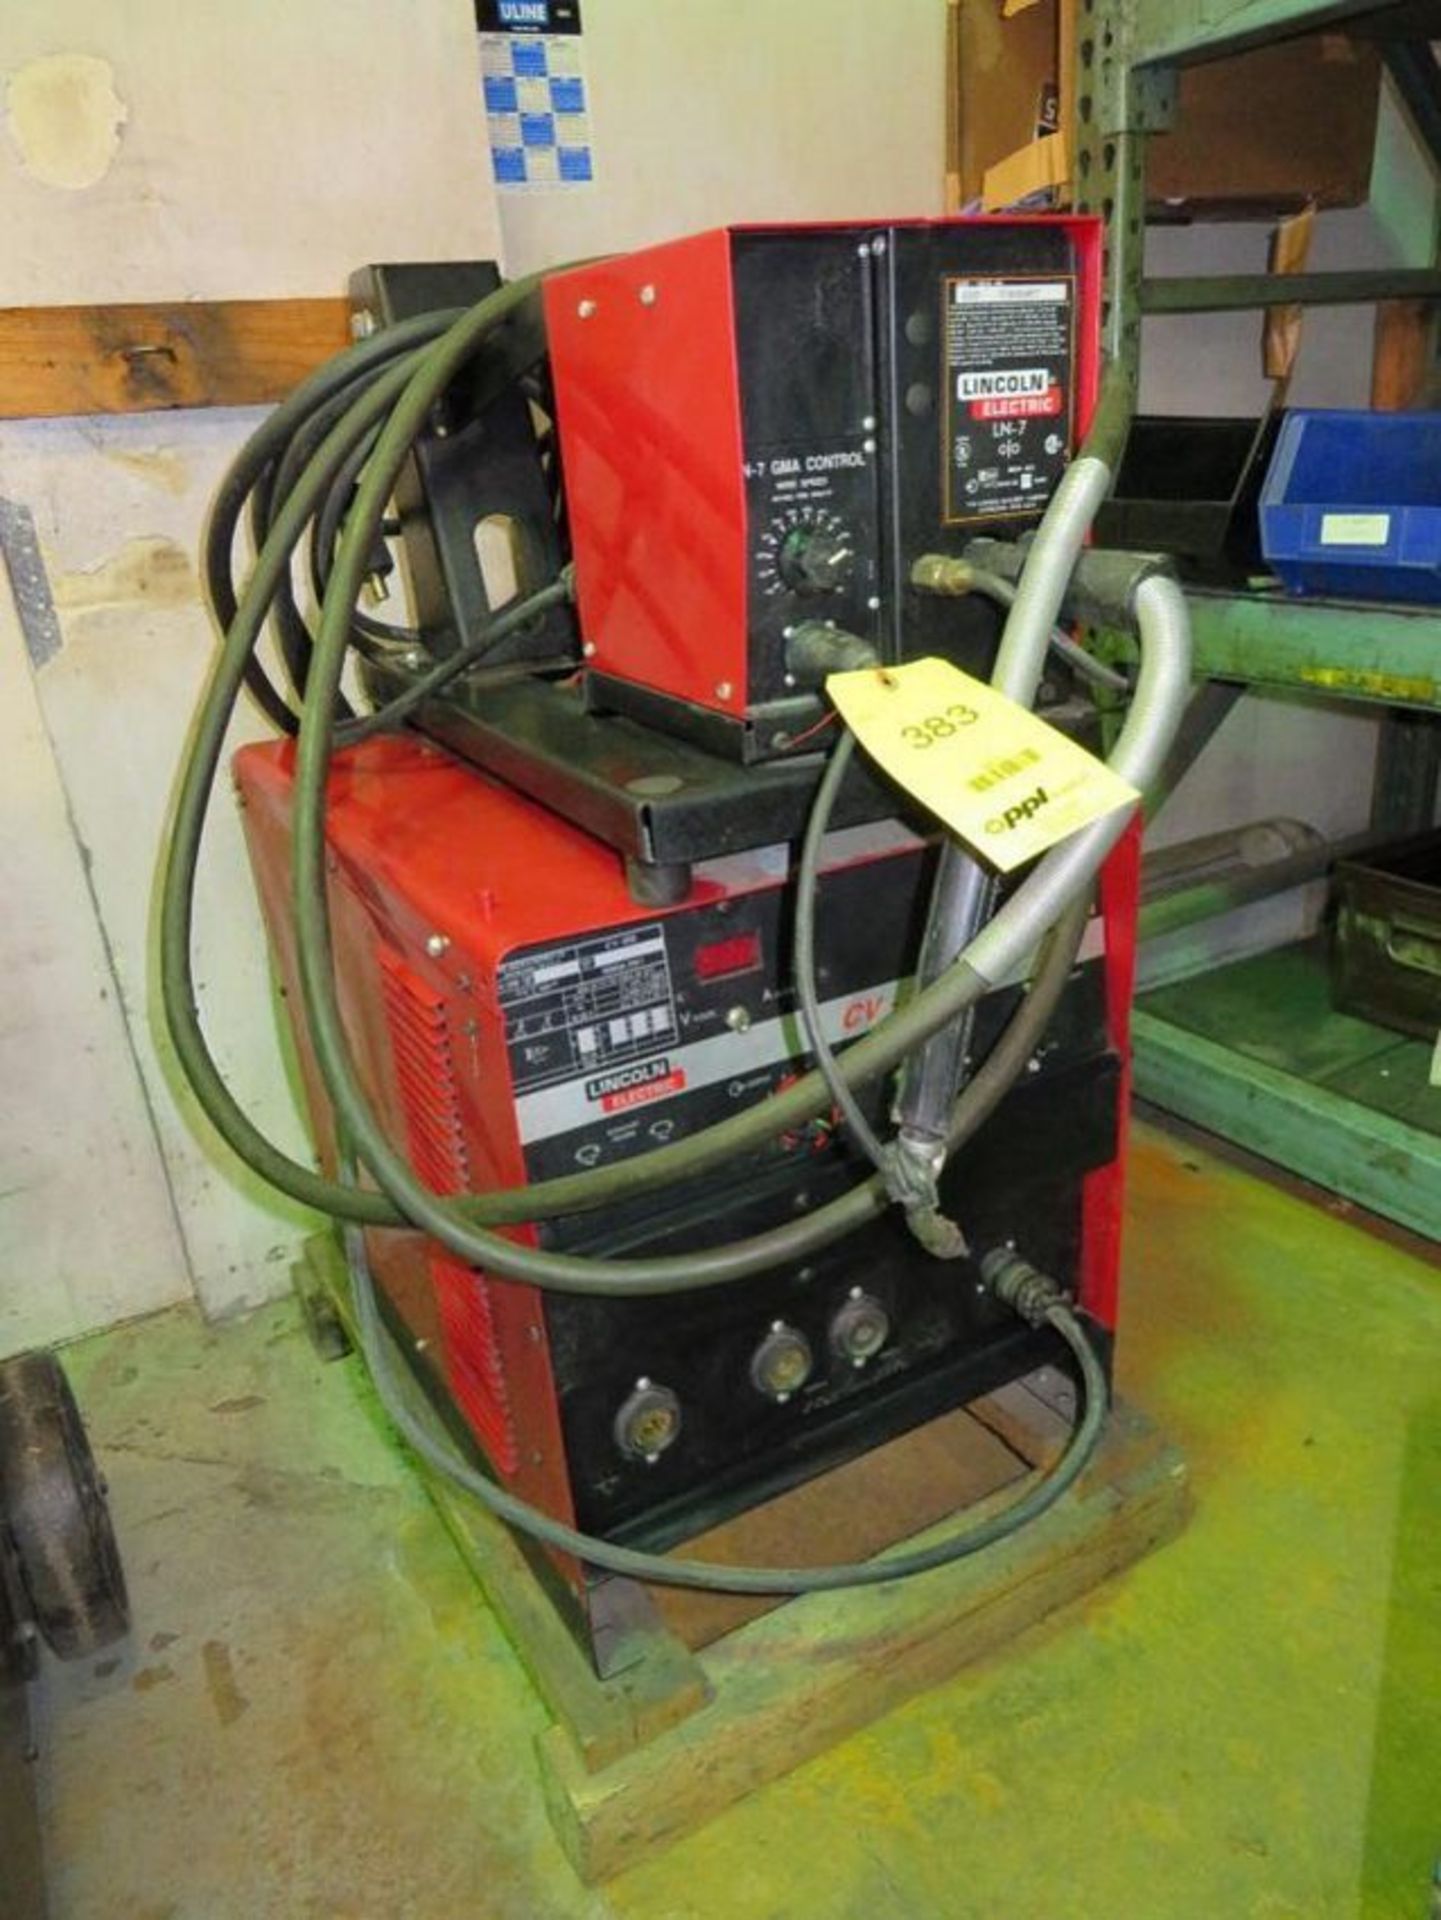 Lincoln 300 Amp Portable MIG Welder Model CV-300, Power Supply, LN-7 Wire Feed, Cables, Gun (Buildin